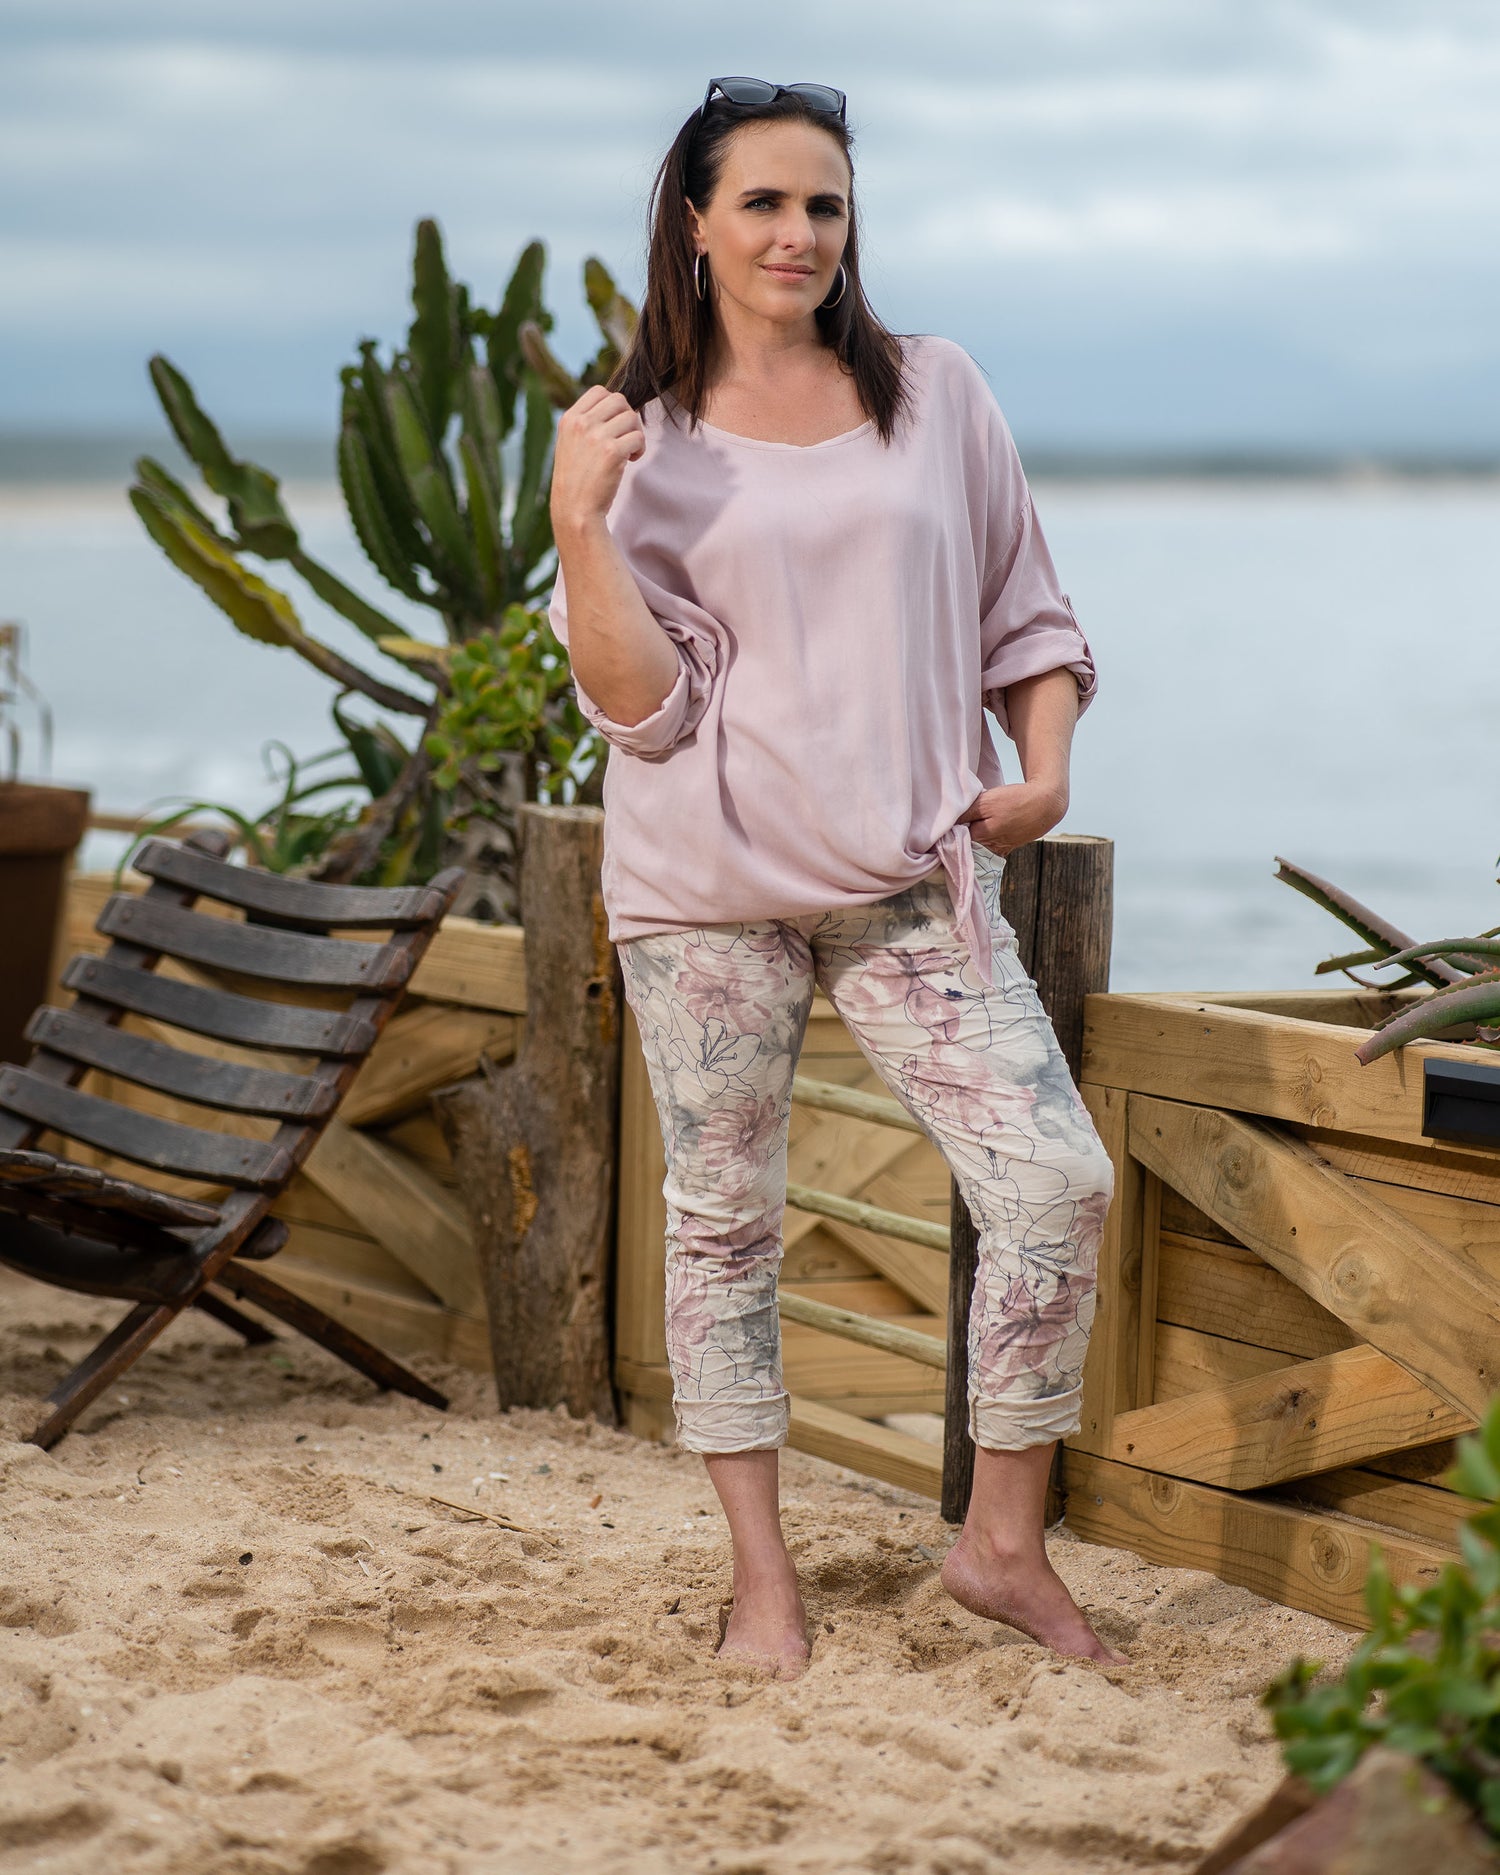 The batwing cut offers a relaxed and airy silhouette, ensuring a comfortable fit while adding a touch of contemporary flair. The round neck enhances the casual charm of the top. The unique front twist not only introduces a touch of creativity but also creates a flattering drape, enhancing the overall visual appeal